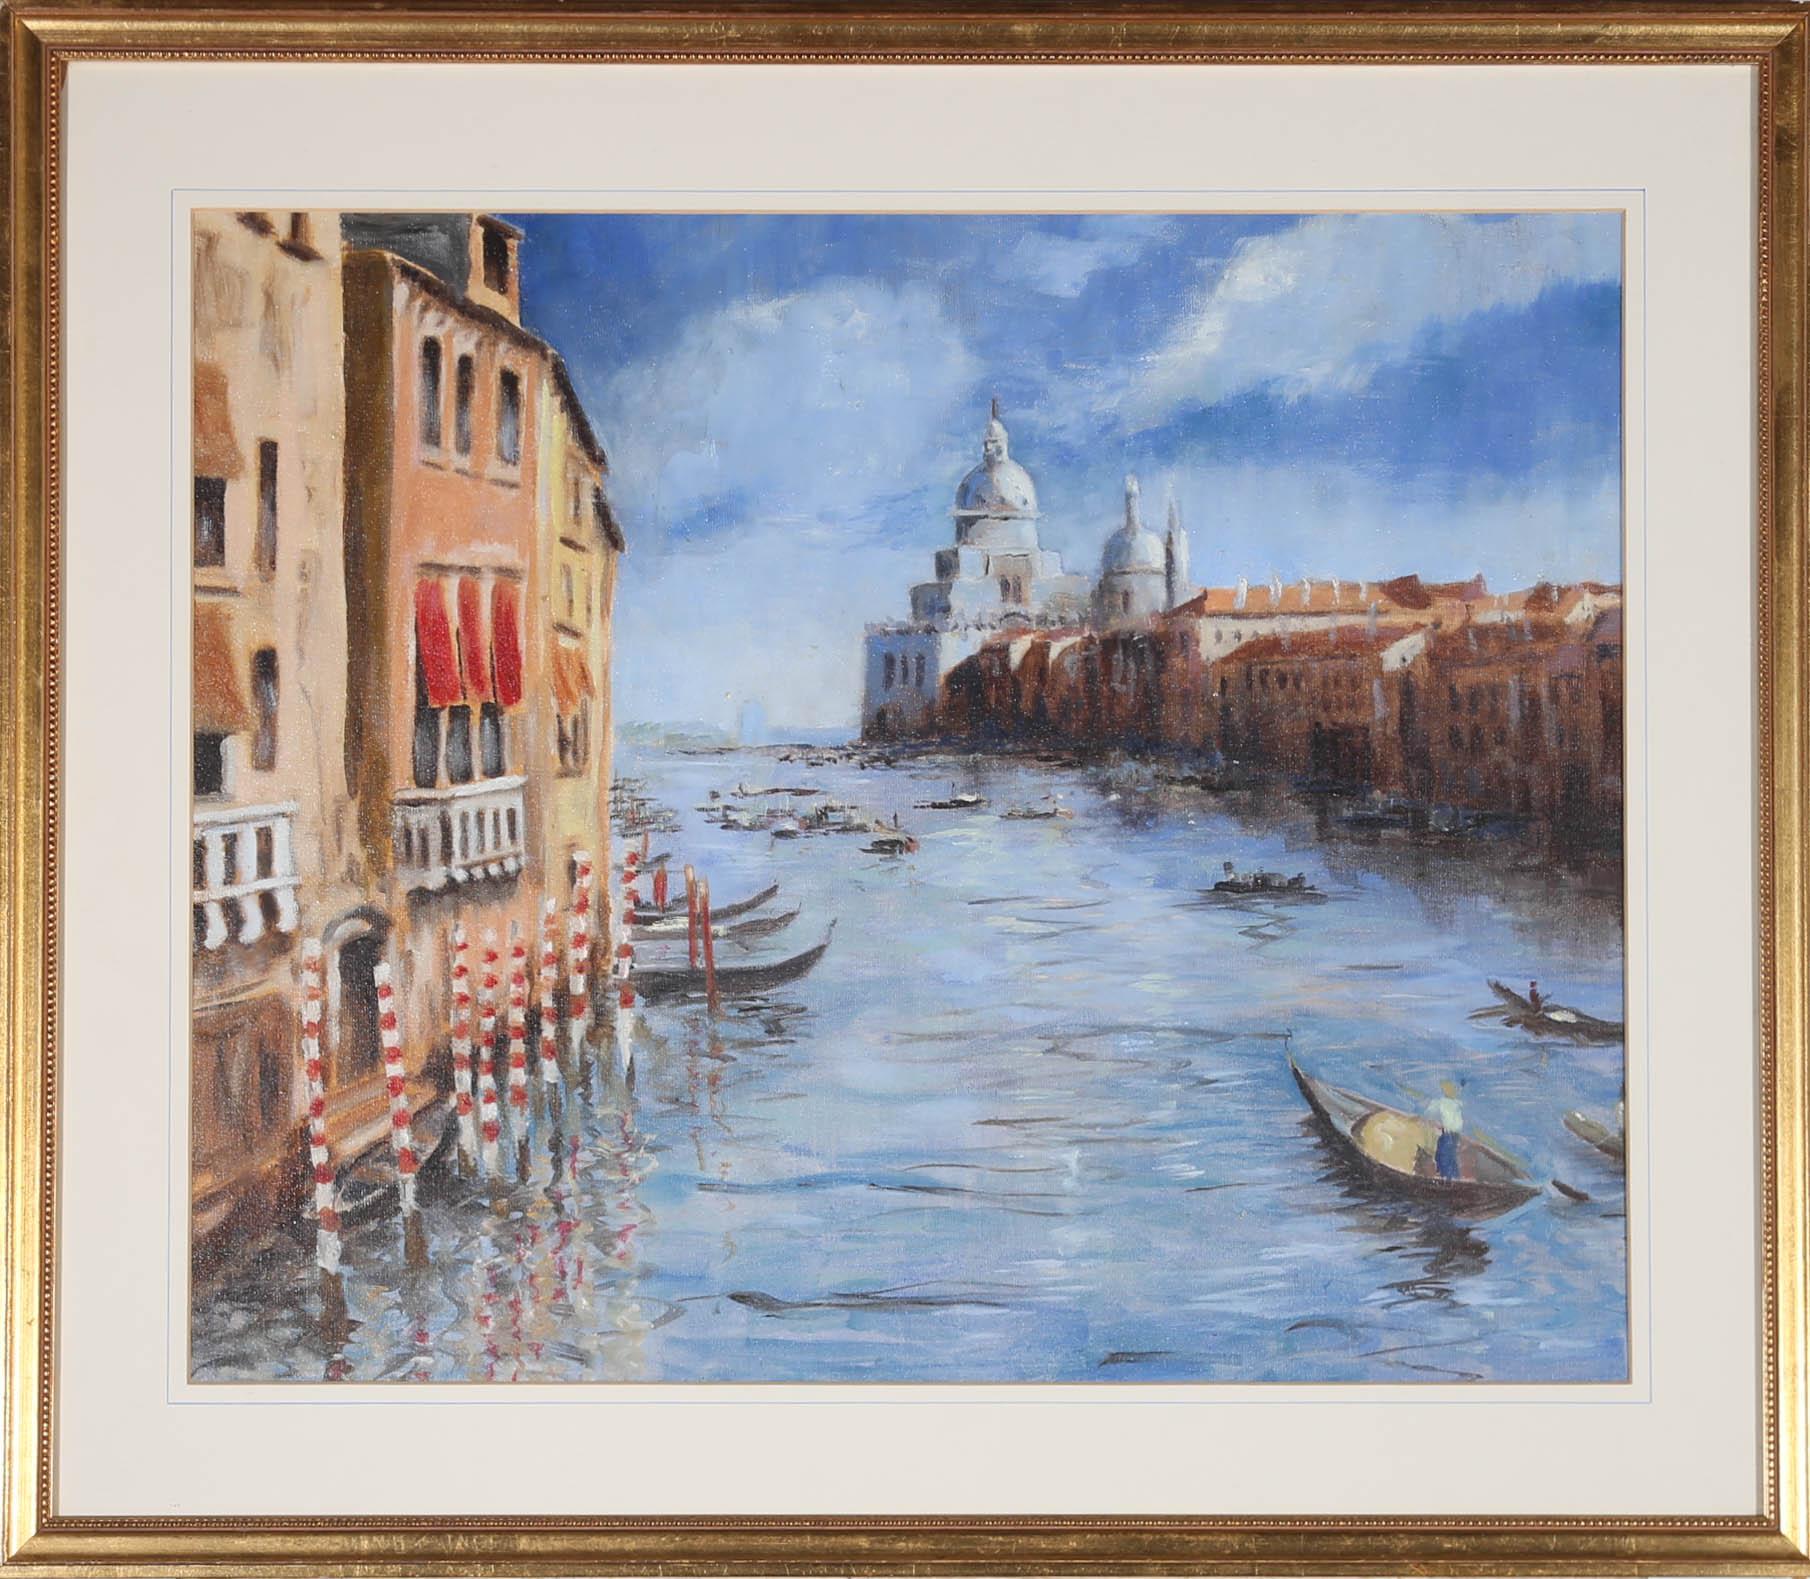 Framed 20th Century Oil - Venetian Waterway - Painting by Unknown